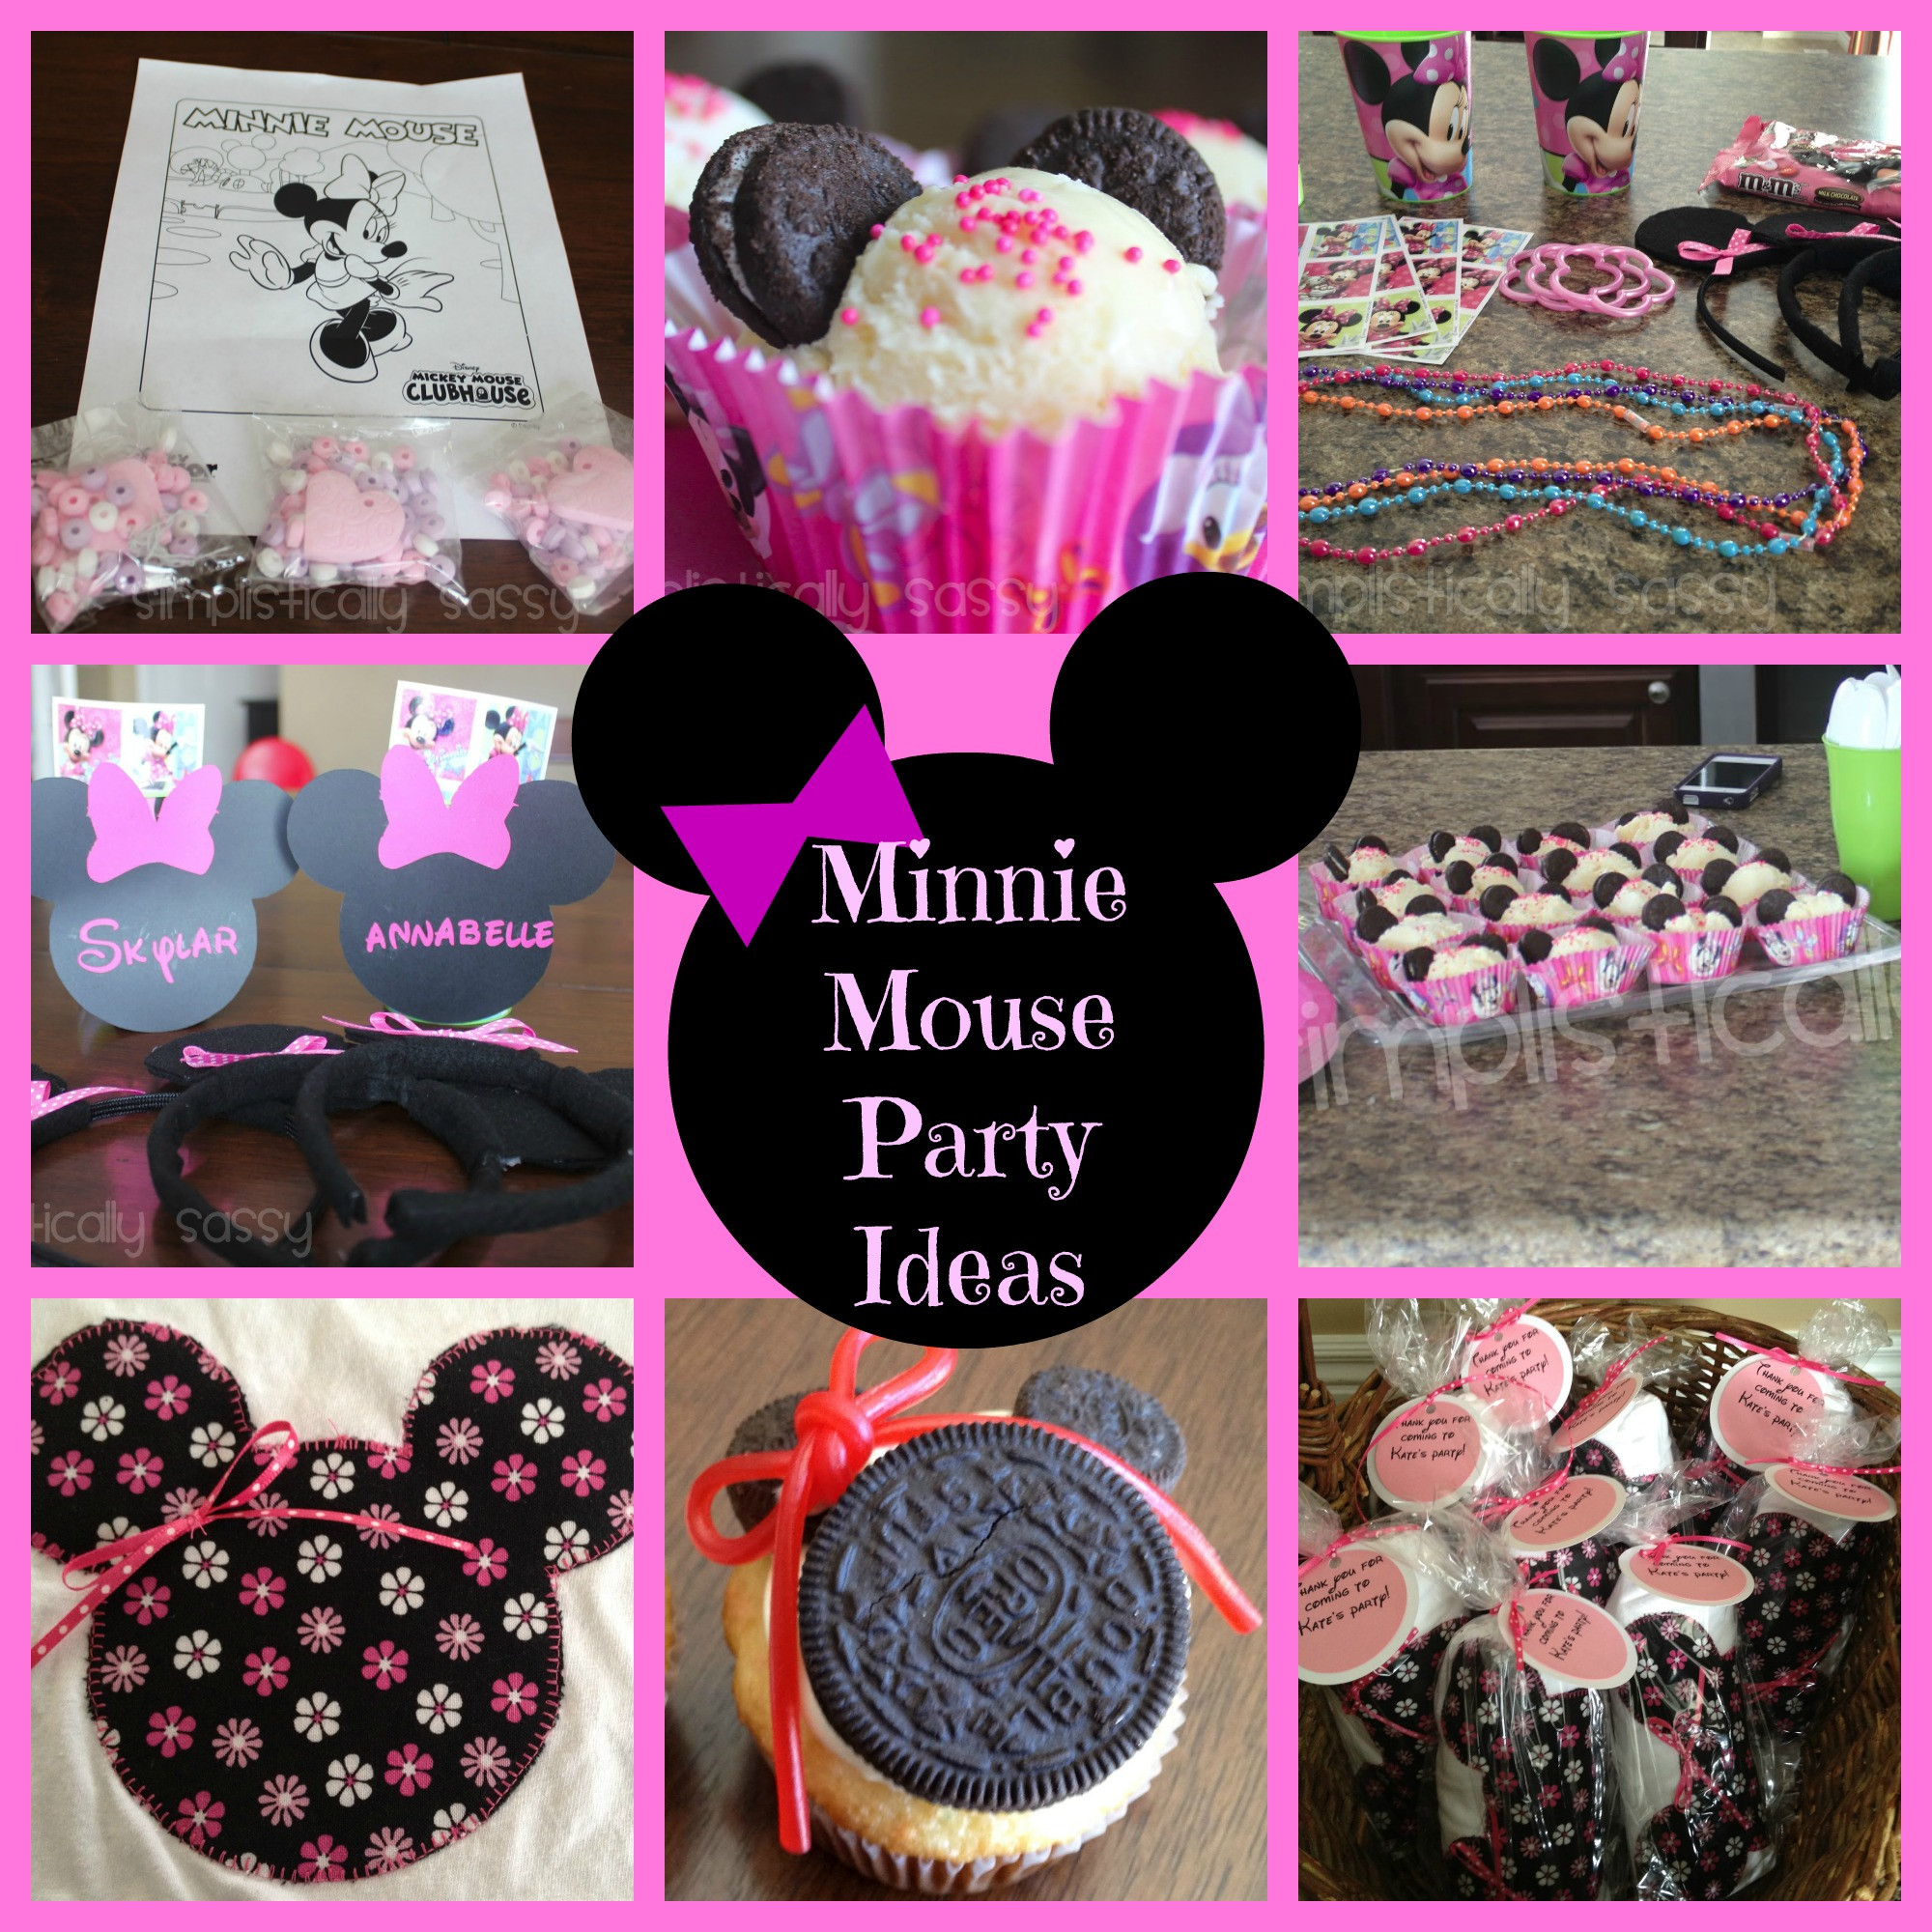 Ideas For A Minnie Mouse Birthday Party
 minnie mouse party favors Archives events to CELEBRATE